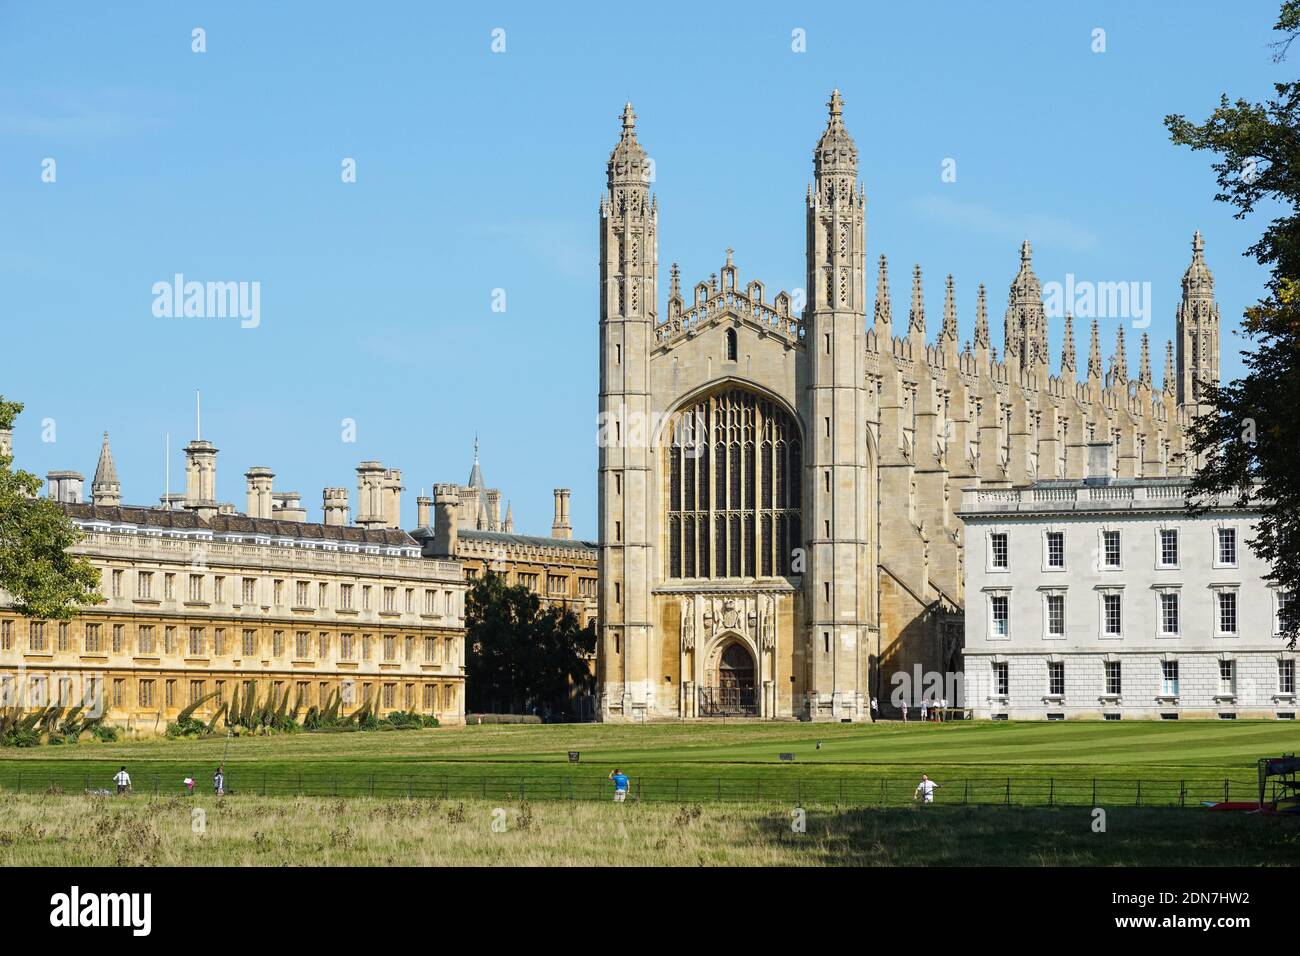 King's College Chapel in the University of Cambridge, Cambridge Cambridgeshire England United Kingdom UK Stock Photo